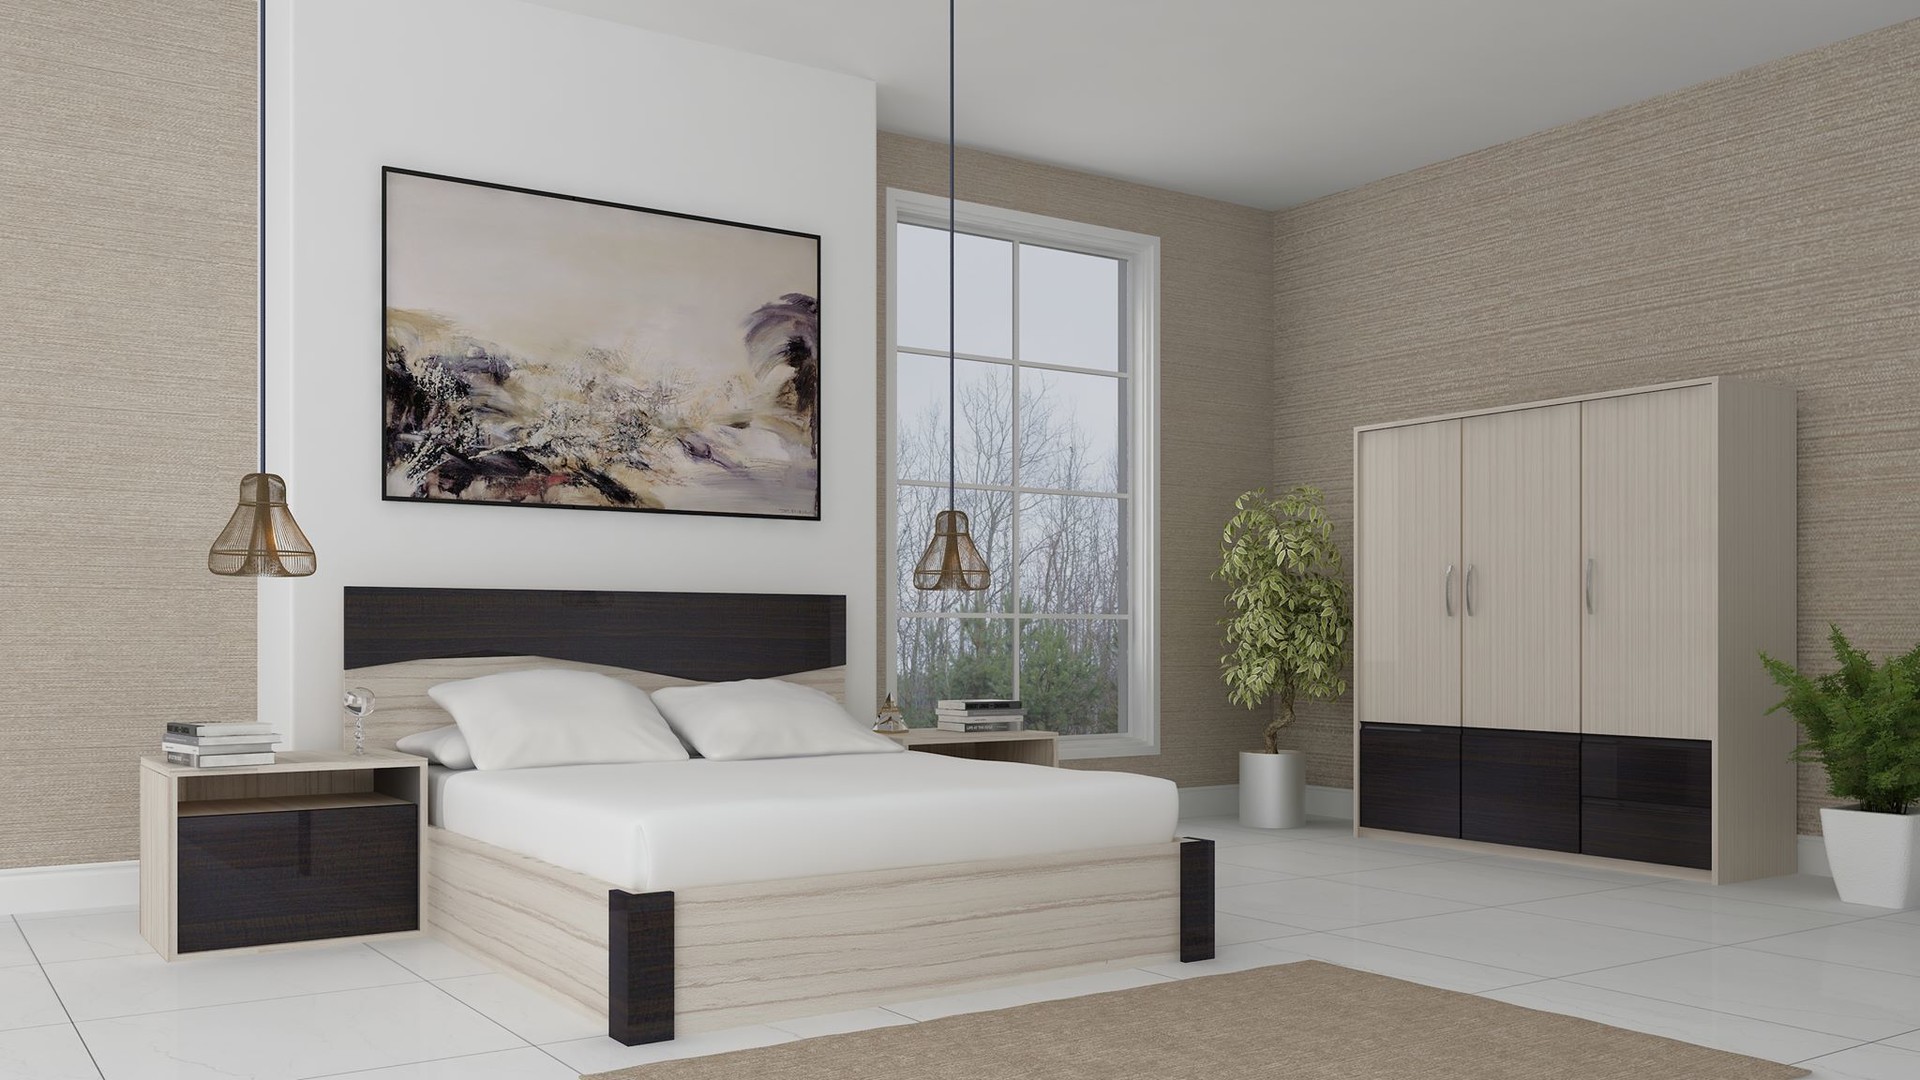 ArtStation - Architectural Rendering Services NYC For Bedroom Interior ...